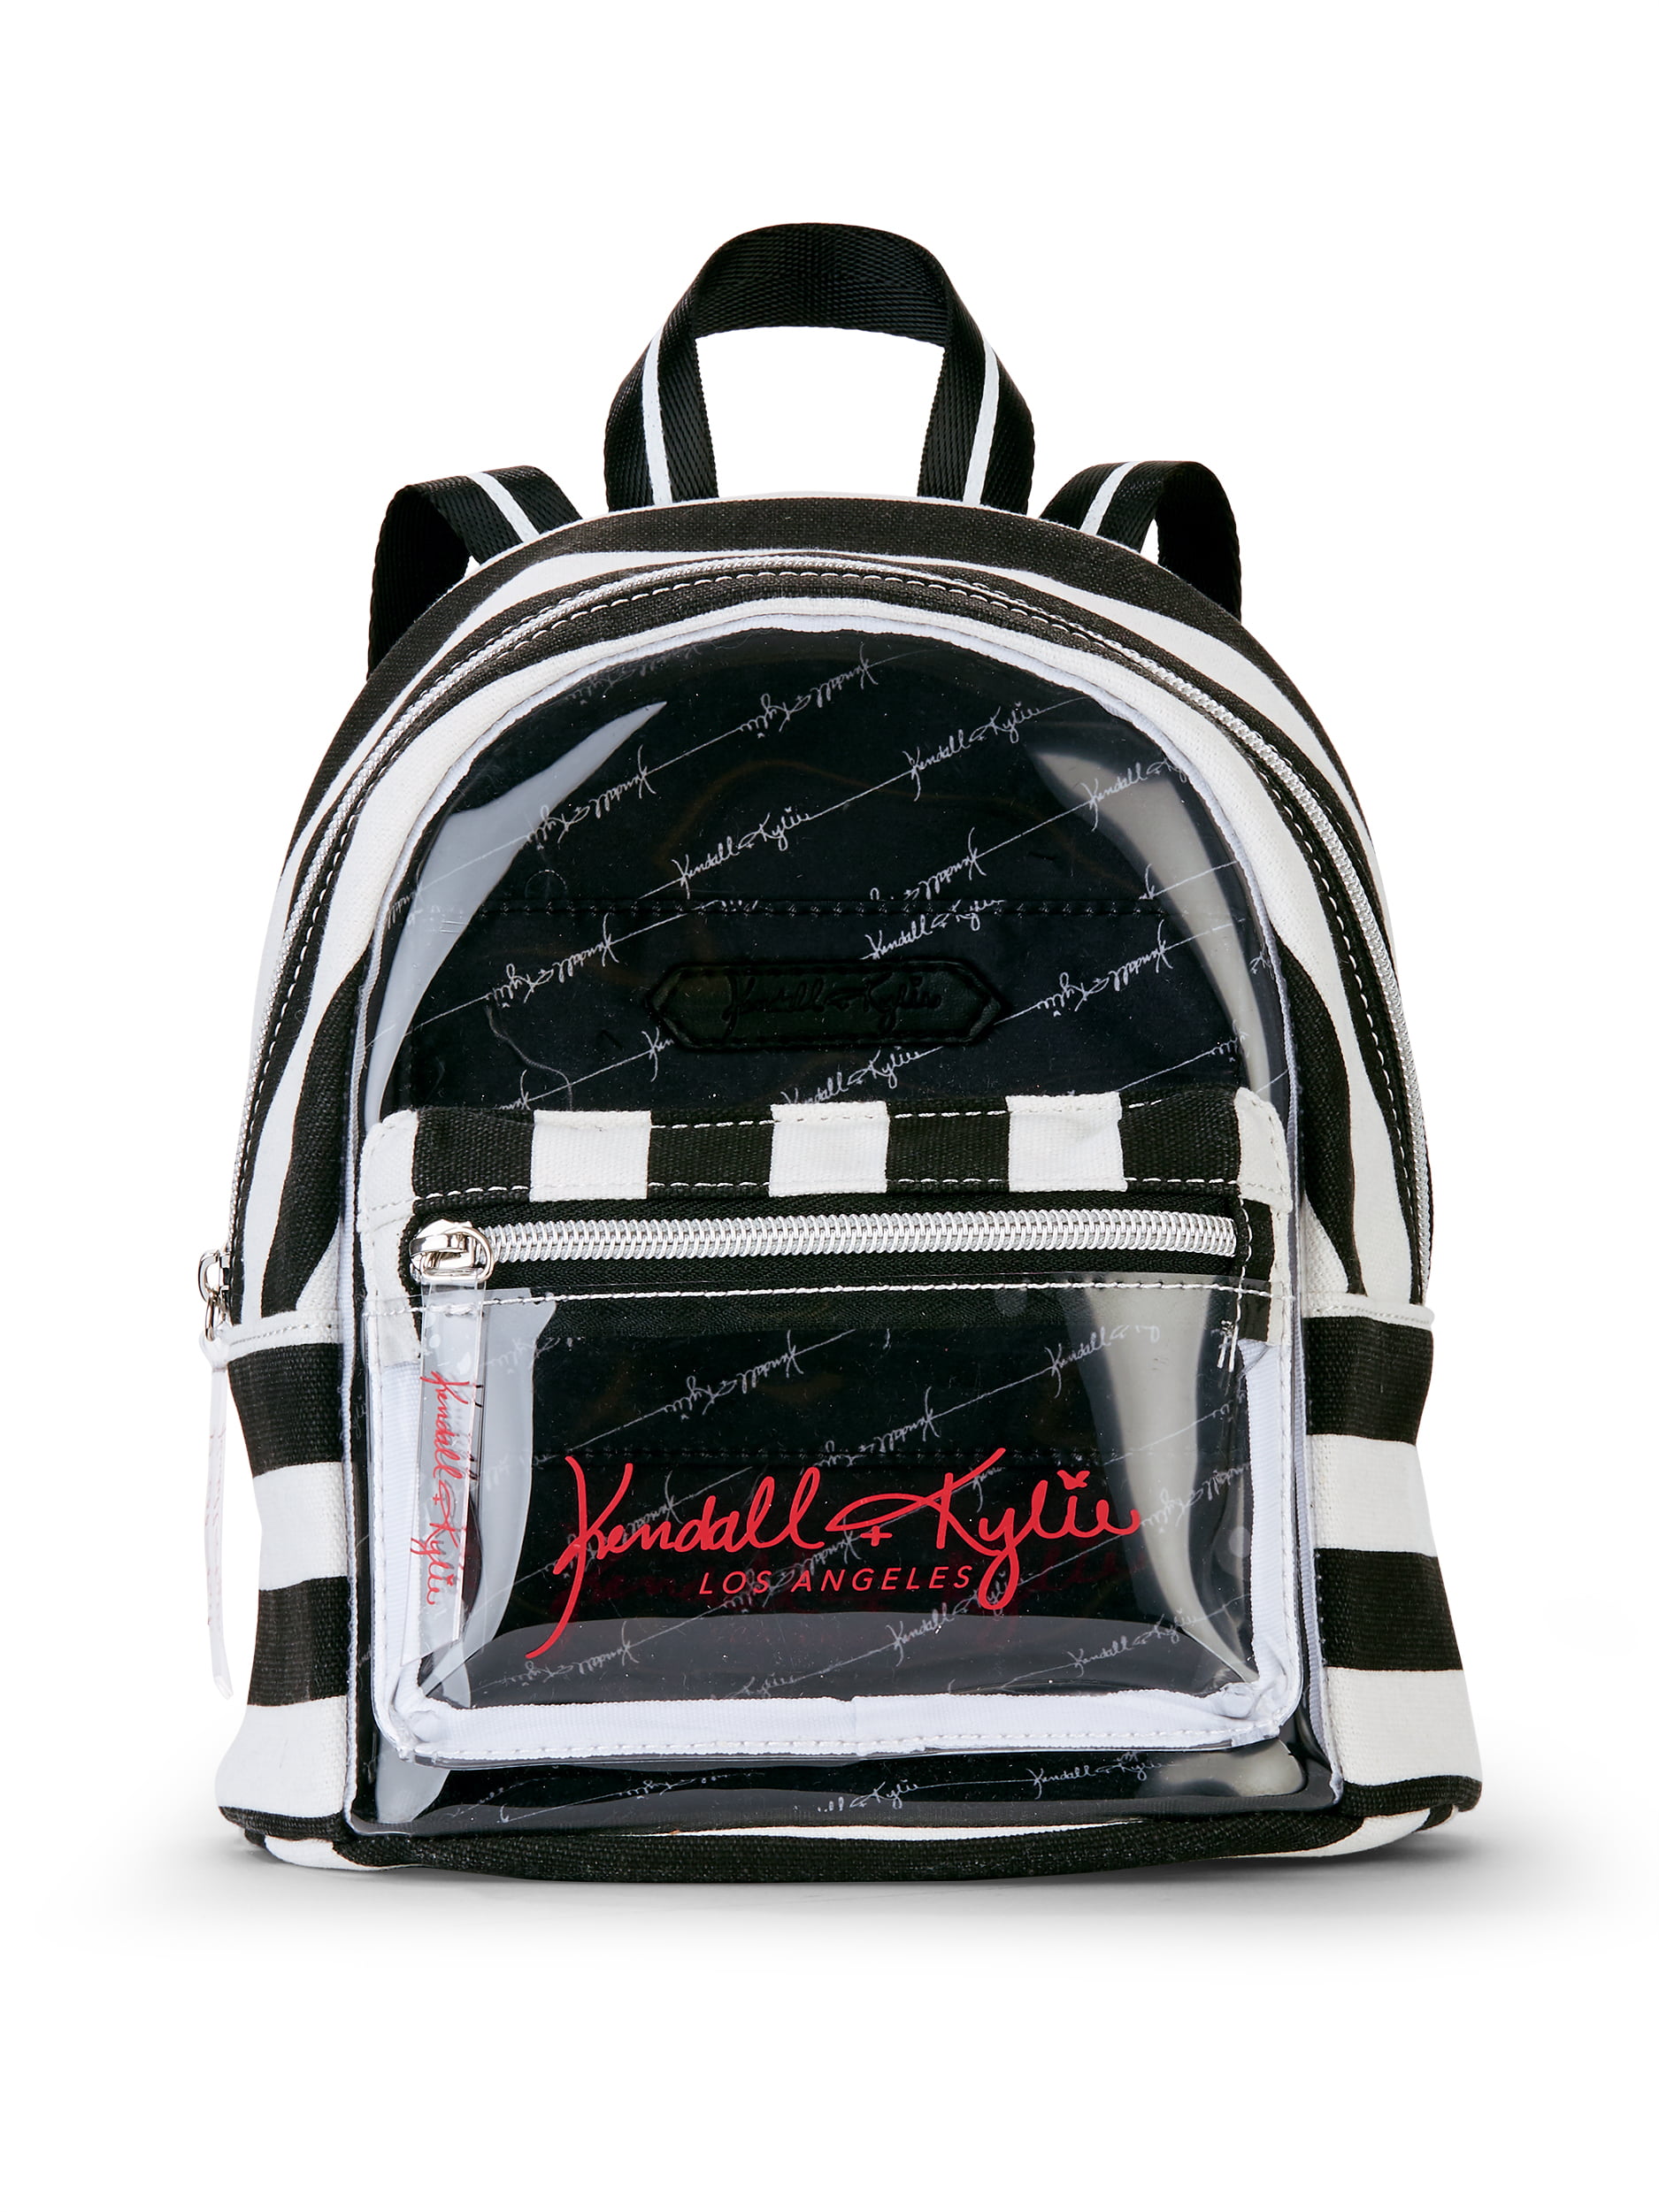 Kendall + Kylie for Walmart Clear Lucite Mini Backpack - Walmart.com